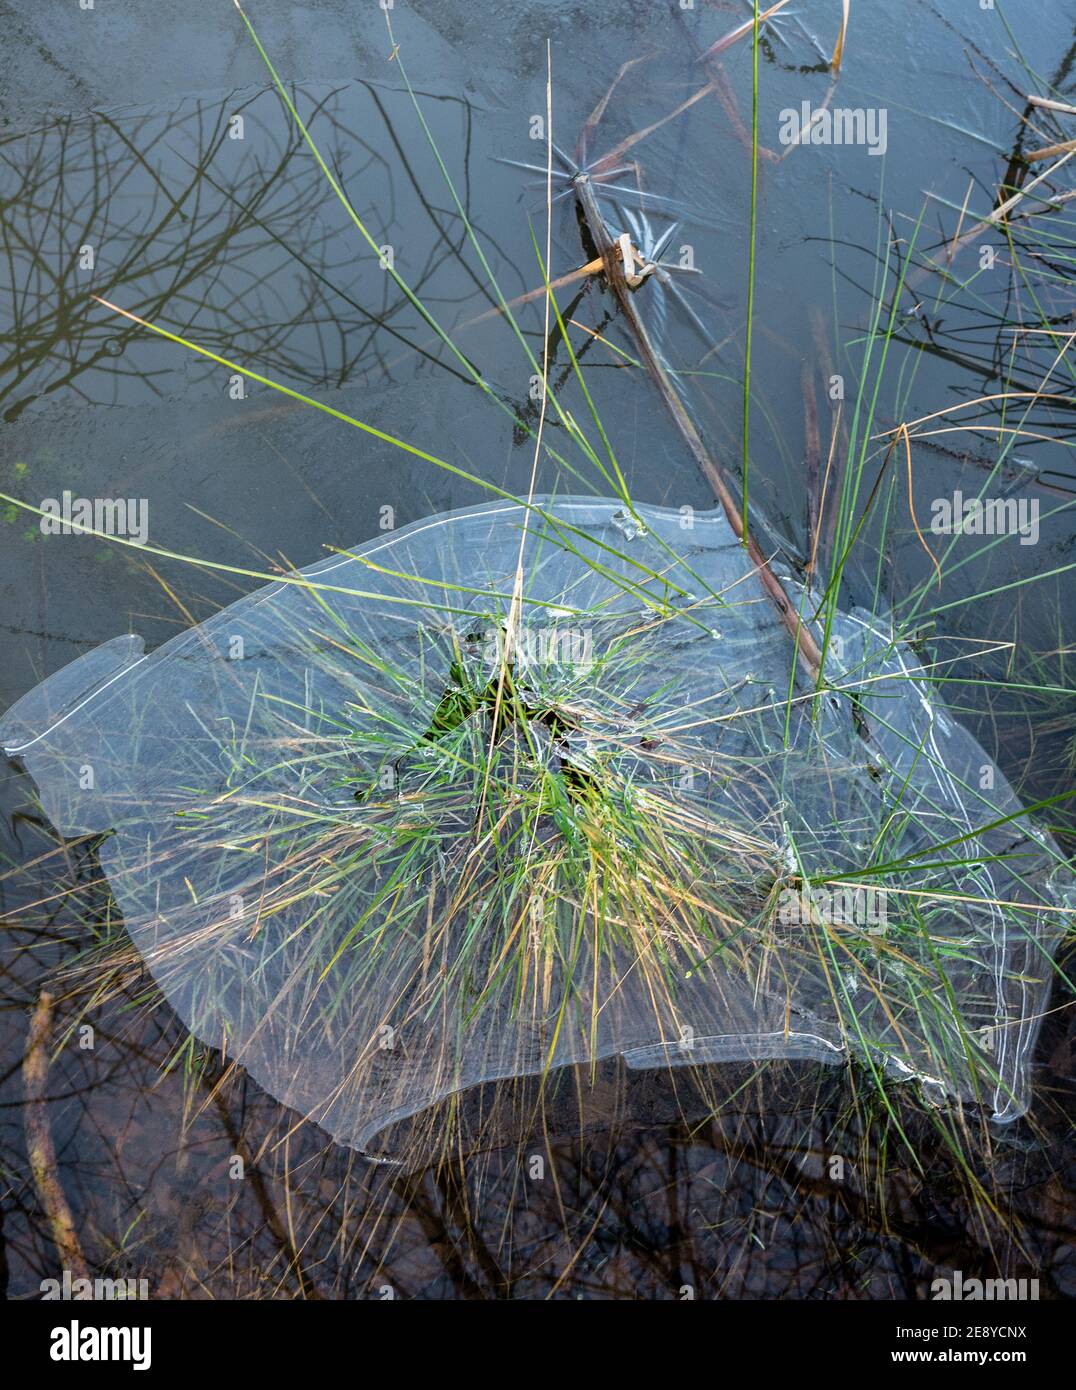 Melting ice formation on plants in a shallow pond. Stock Photo